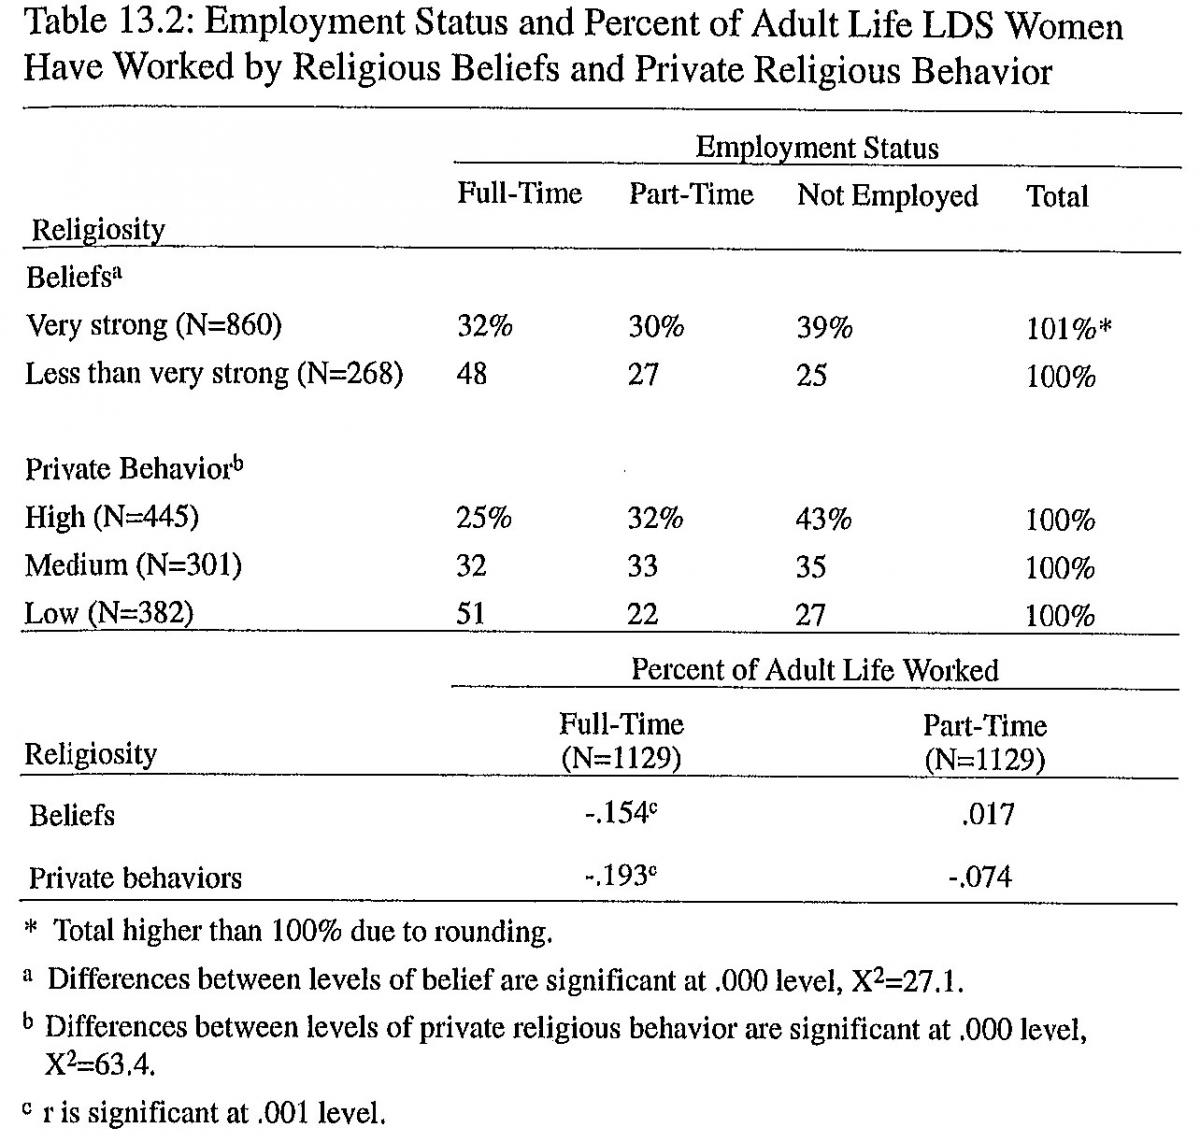 Employment Status and Percent of Adult Life LDS Women Have Worked by Religious Beliefs and Private Religious Behavior